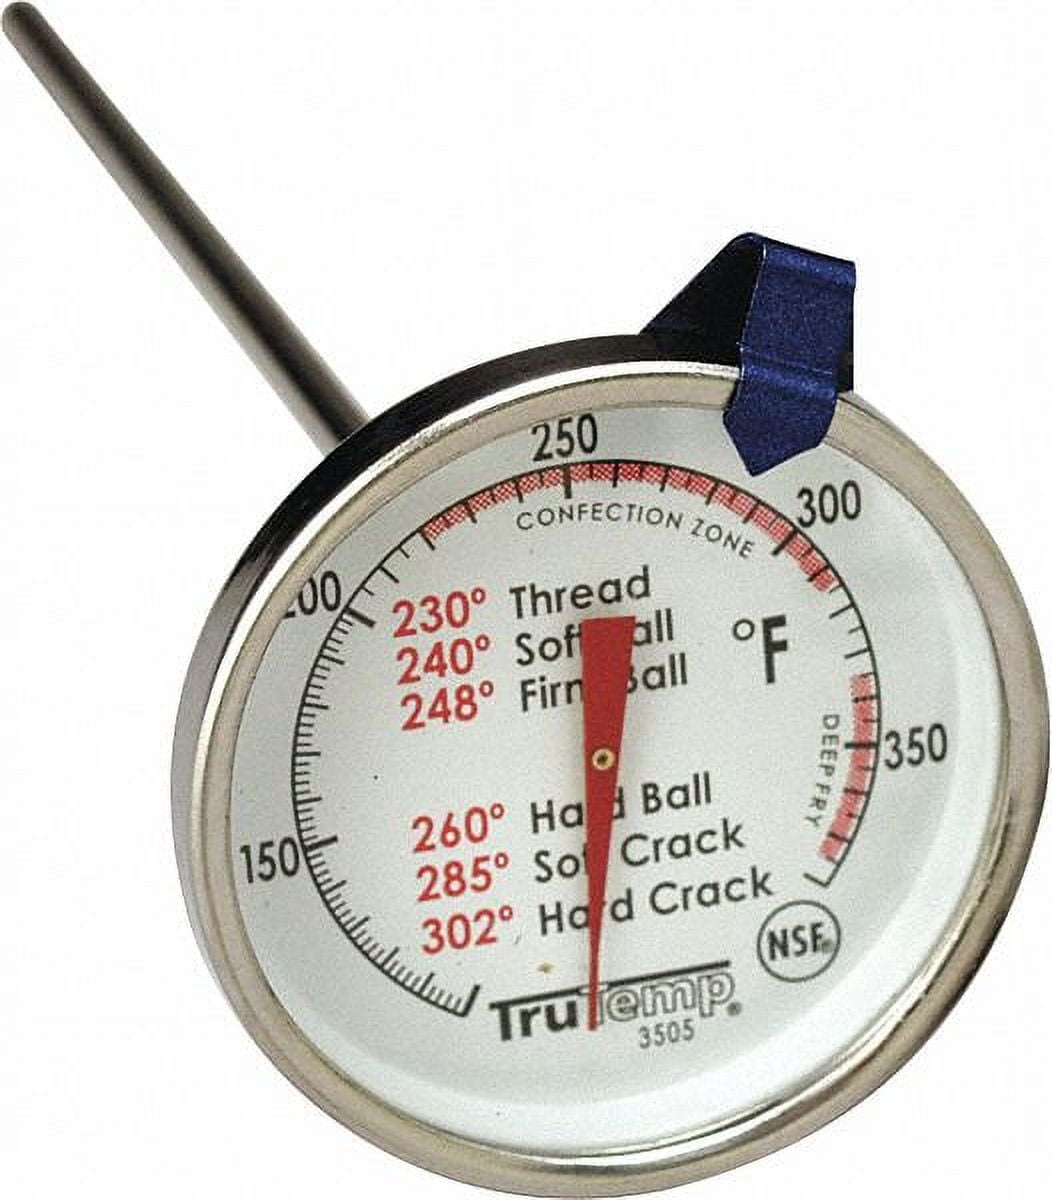 Deep Fry/Candy Thermometer - Tillman's Restaurant Equipment and Supplies